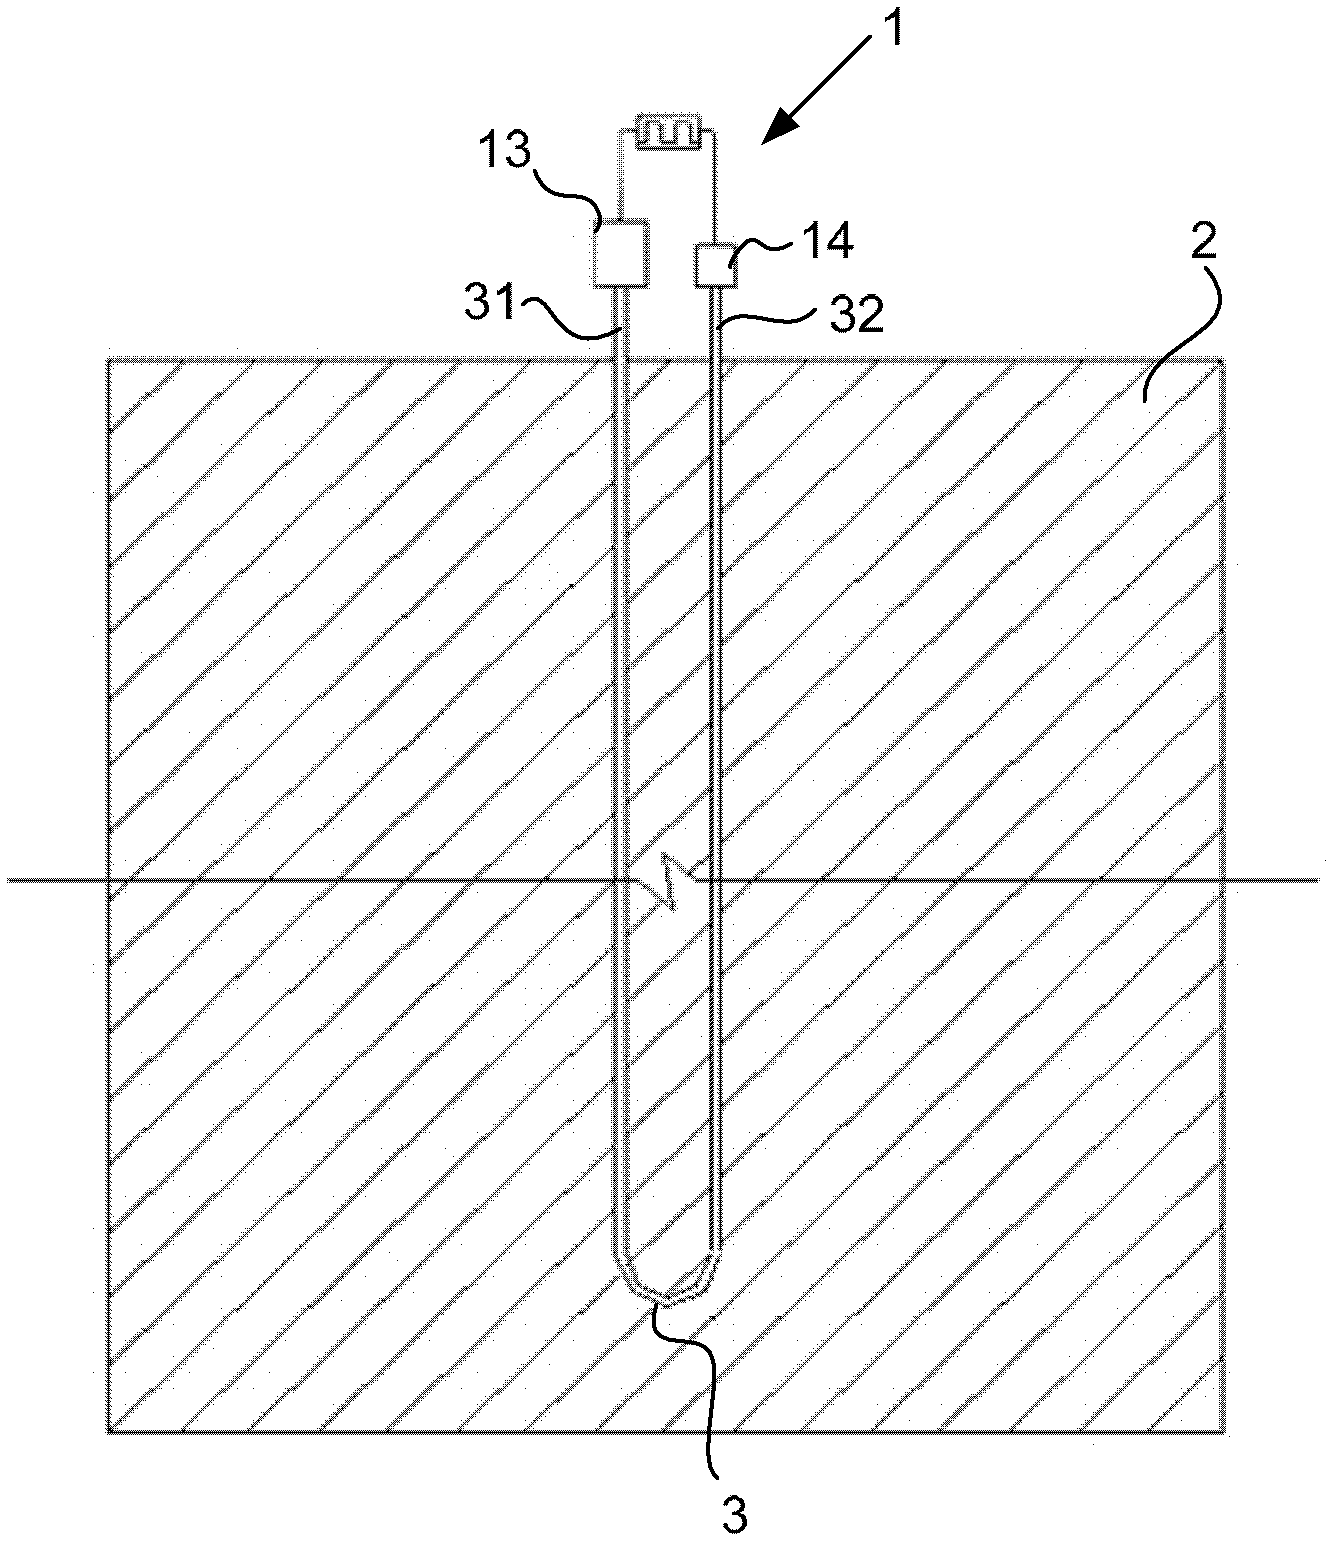 Pipeline length measuring device for pipeline full of incompressible fluid